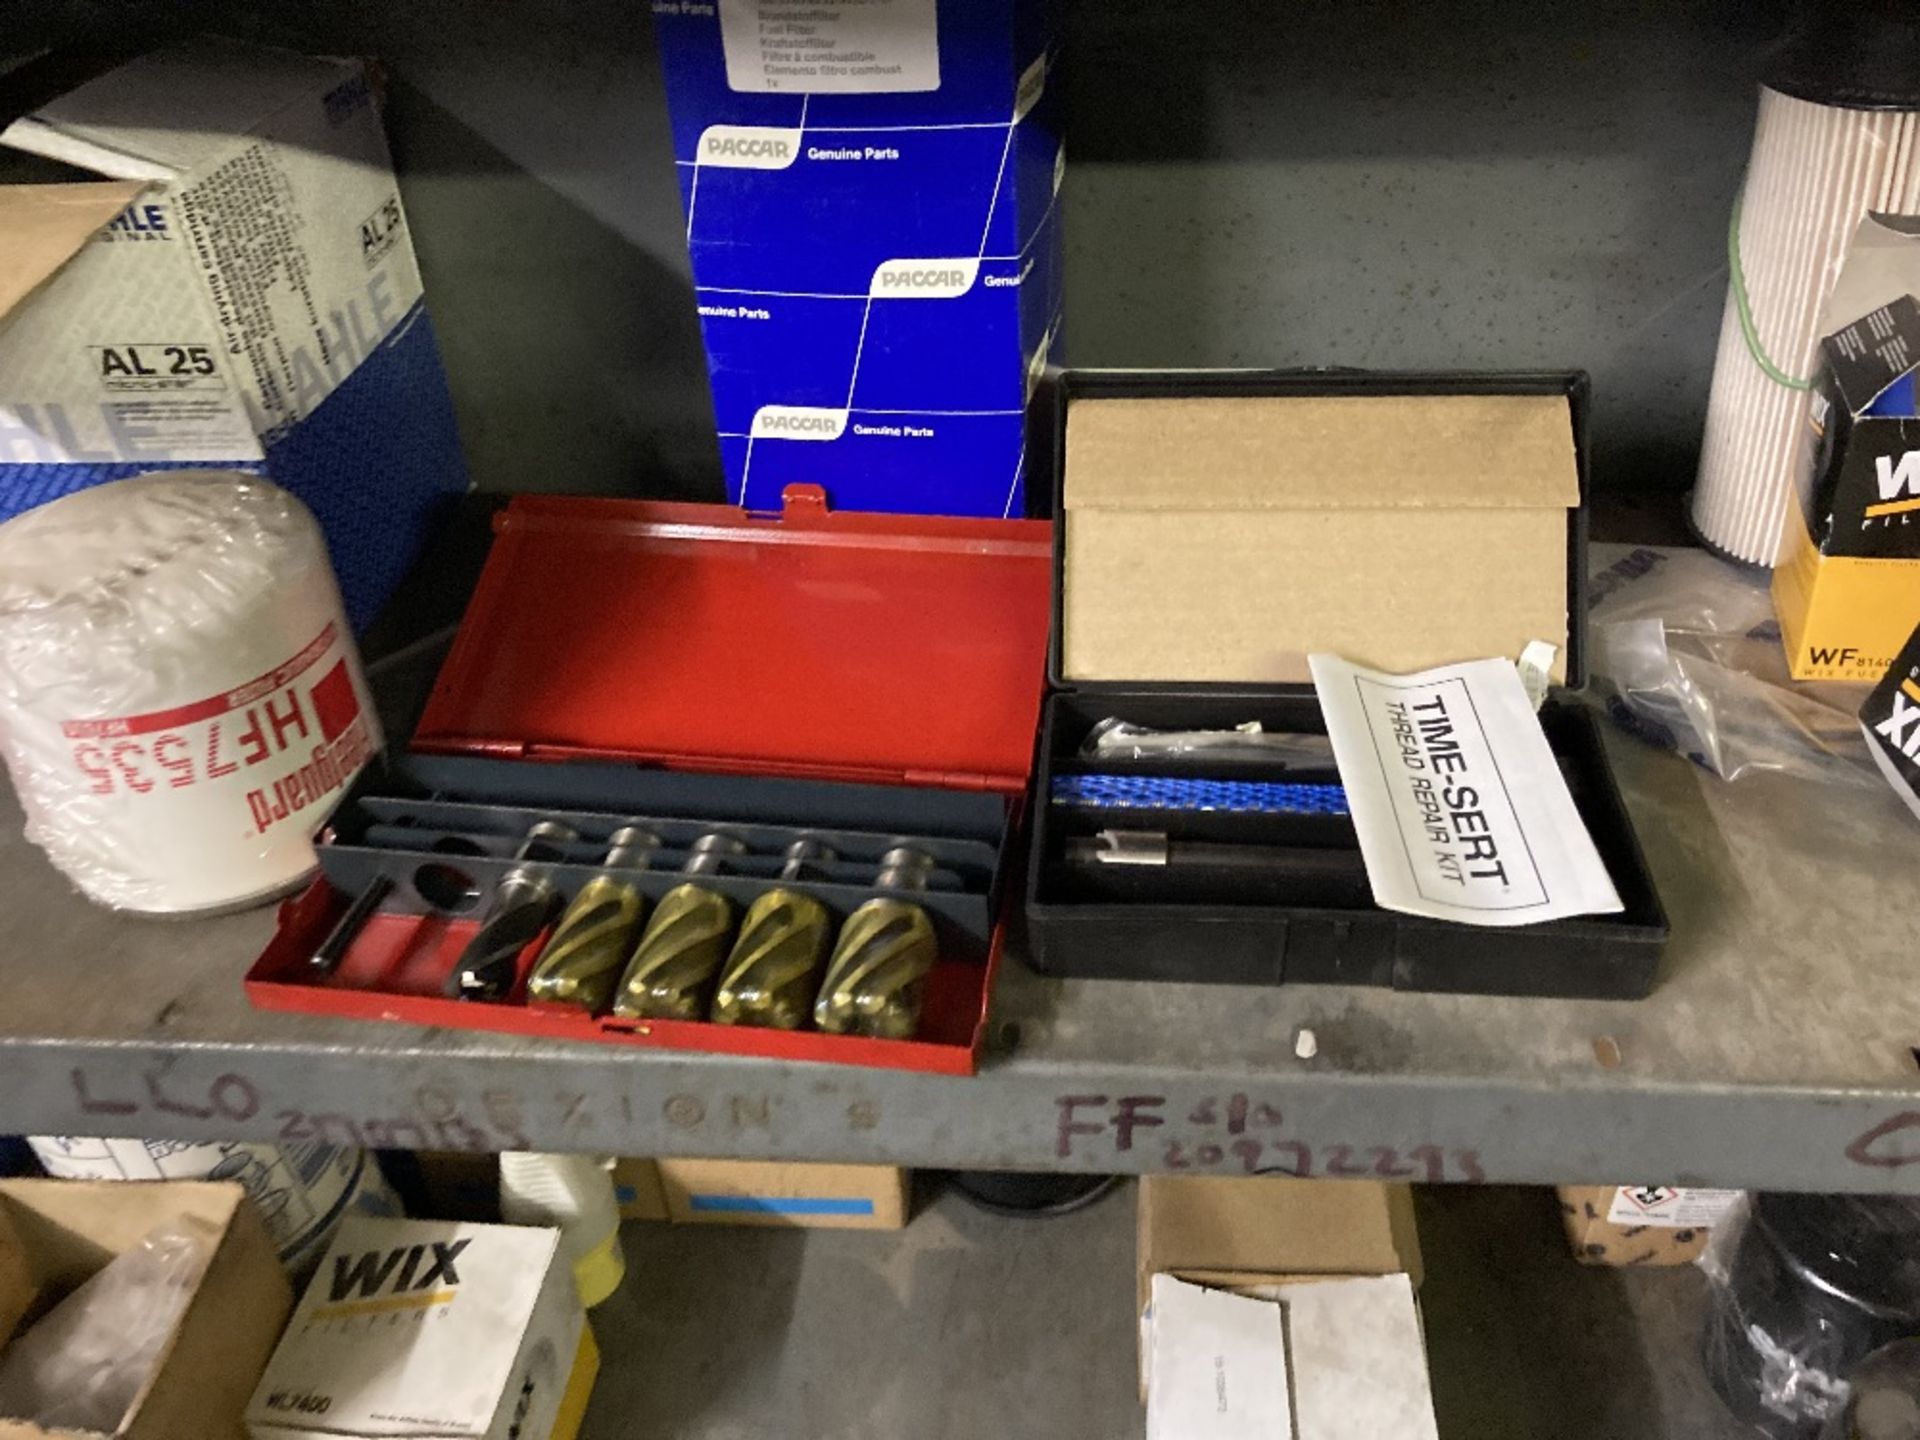 Content of Parts Room Containing Large Quantity of Various Parts & Components - Image 65 of 150